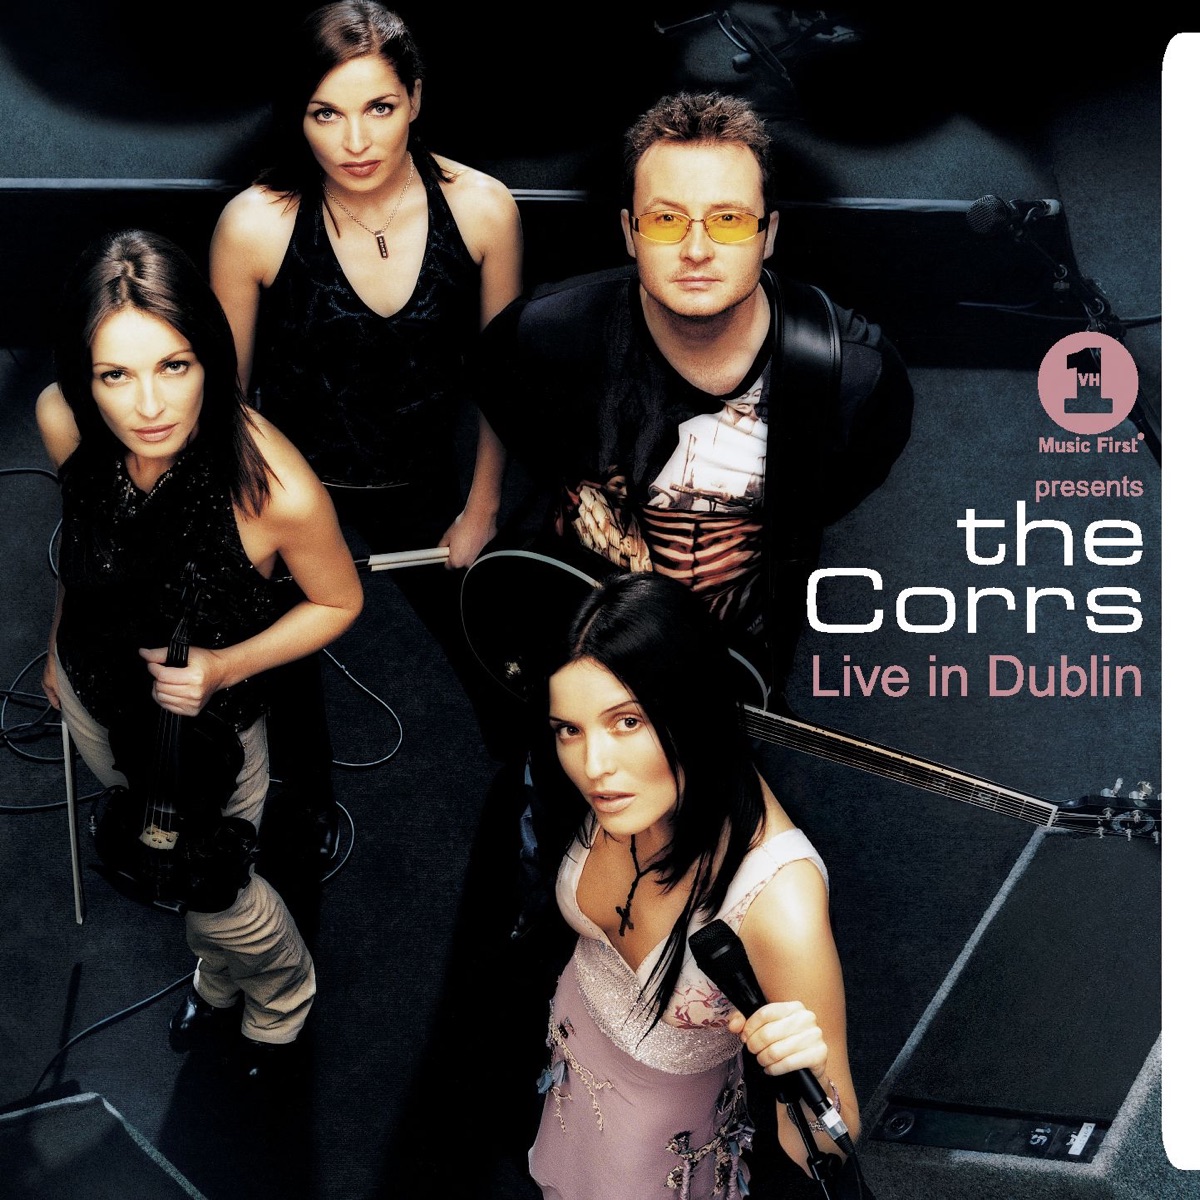 The Corrs Unplugged (Live) by The Corrs on Apple Music